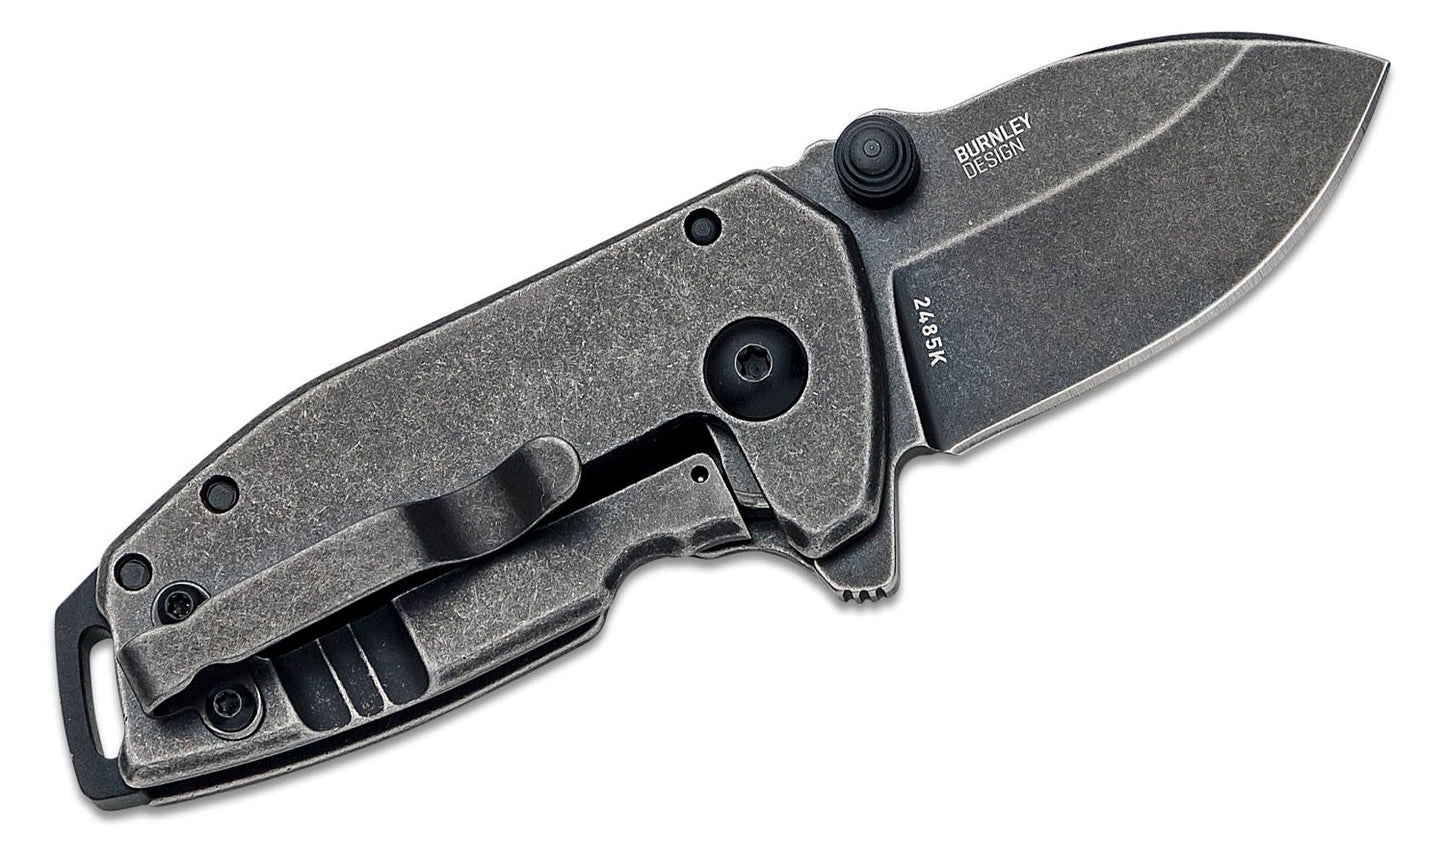 Columbia River CRKT 2485K Lucas Burnley Squid Compact Assisted Flipper Knife 1.75" Black Stonewashed Drop Point Blade, Black Stainless Steel Handles